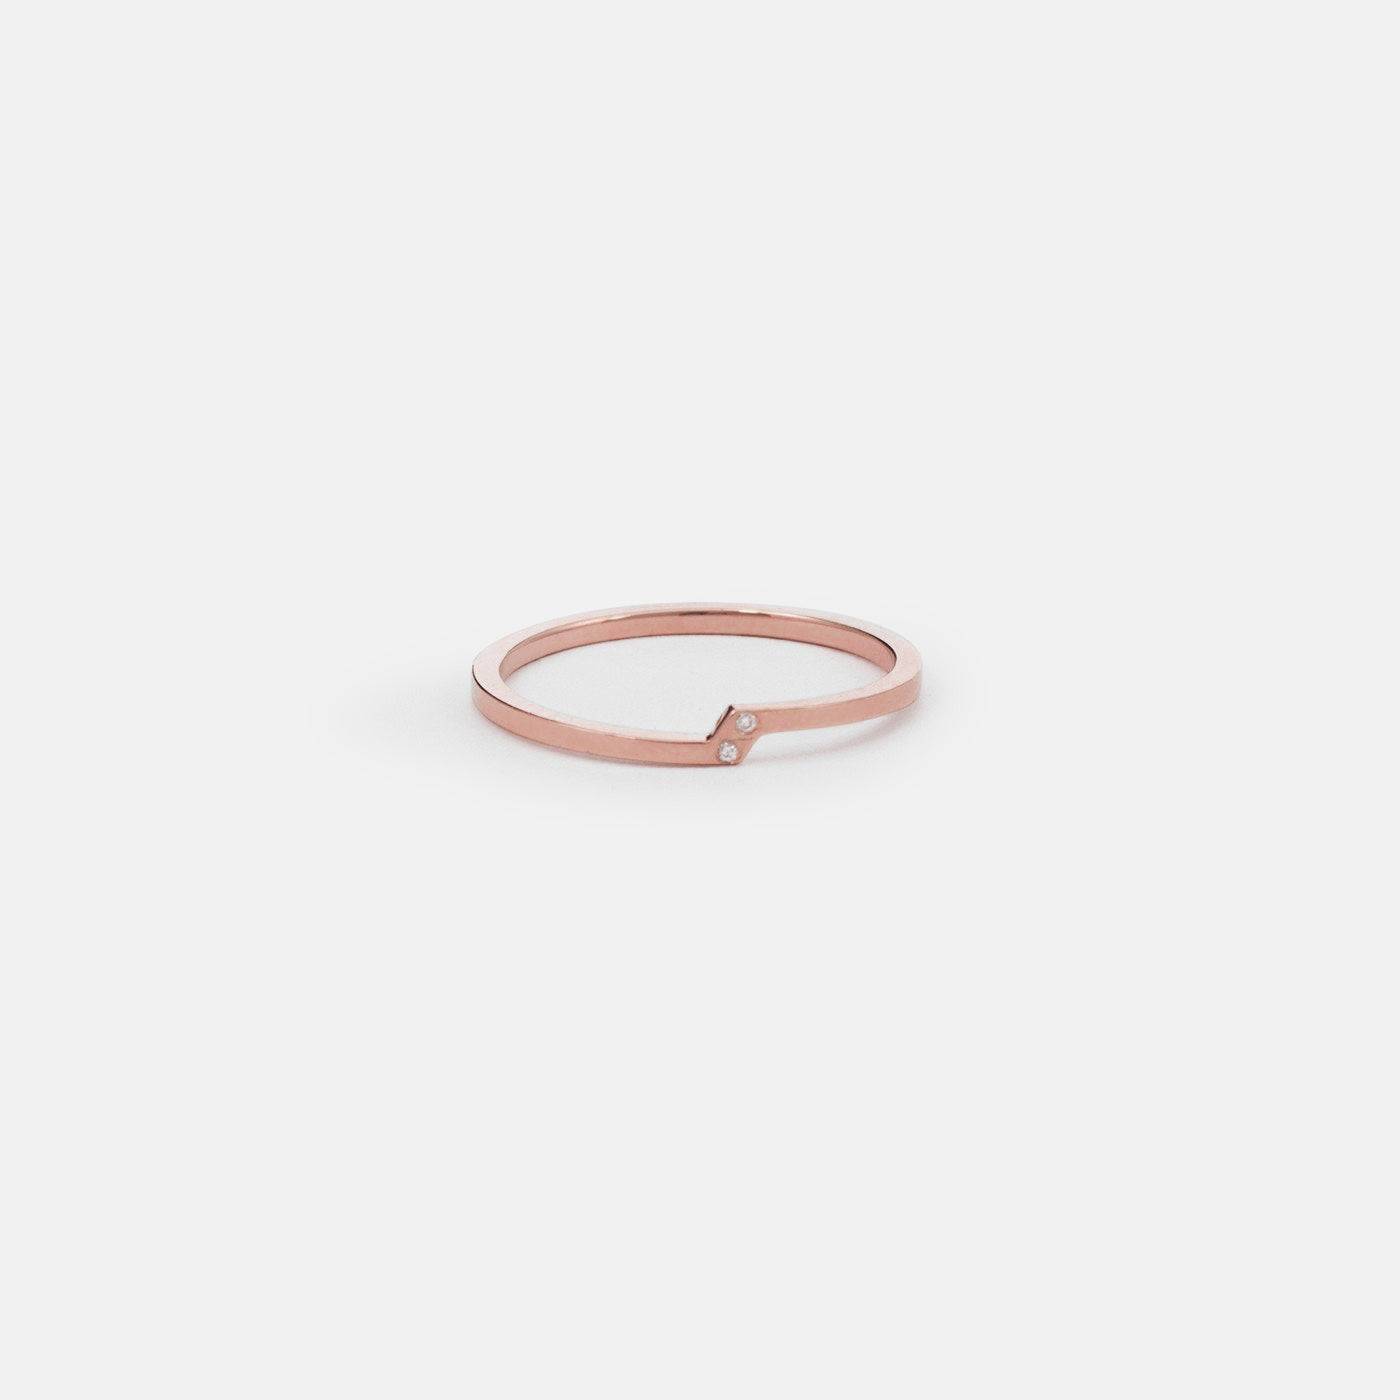 Rili Cool Ring in 14k Rose Gold set with White Diamonds By SHW Fine Jewelry NYC